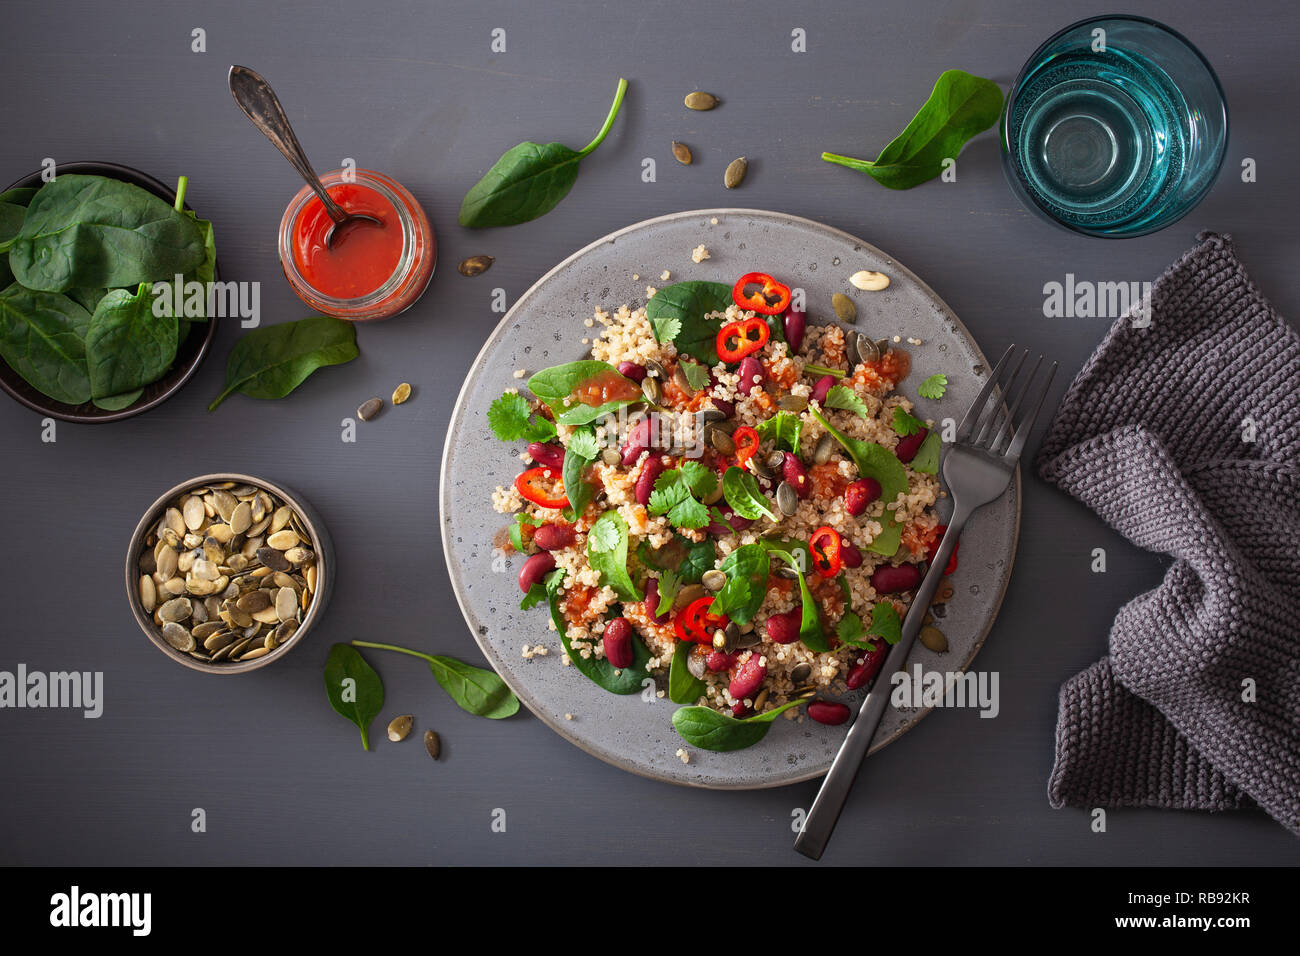 healthy bean and quinoa salad with spinach, chili Stock Photo